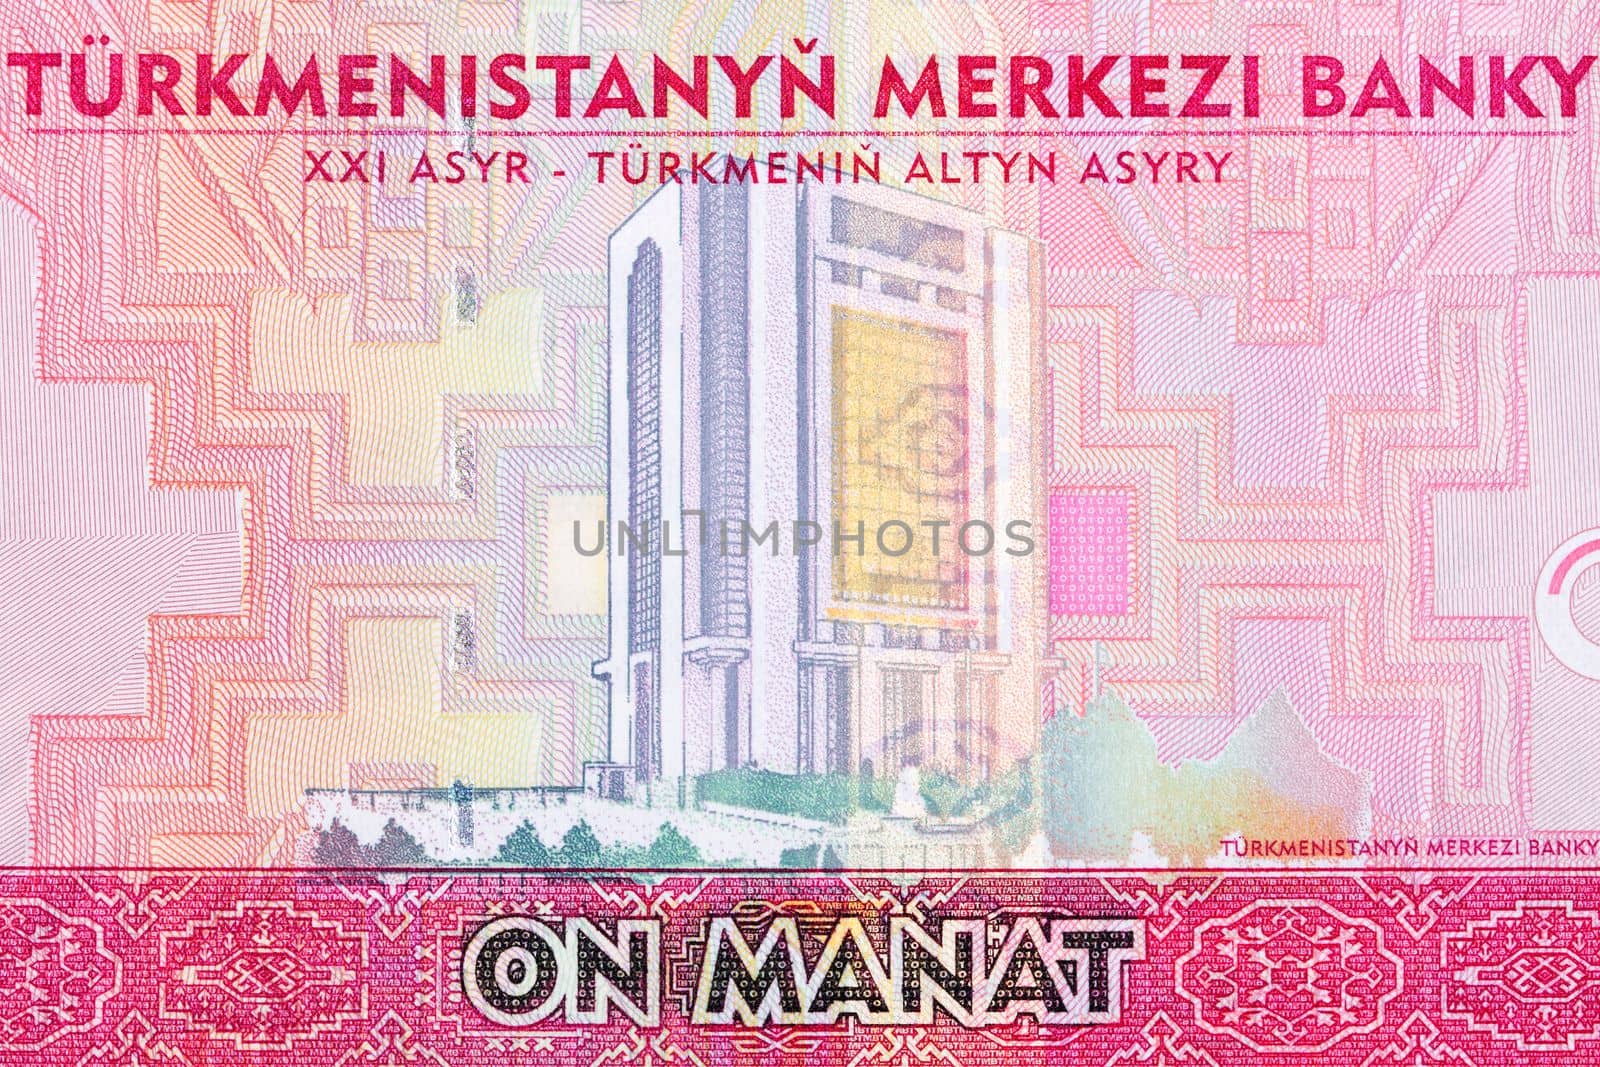 Central Bank of Turkmenistan from money - manat